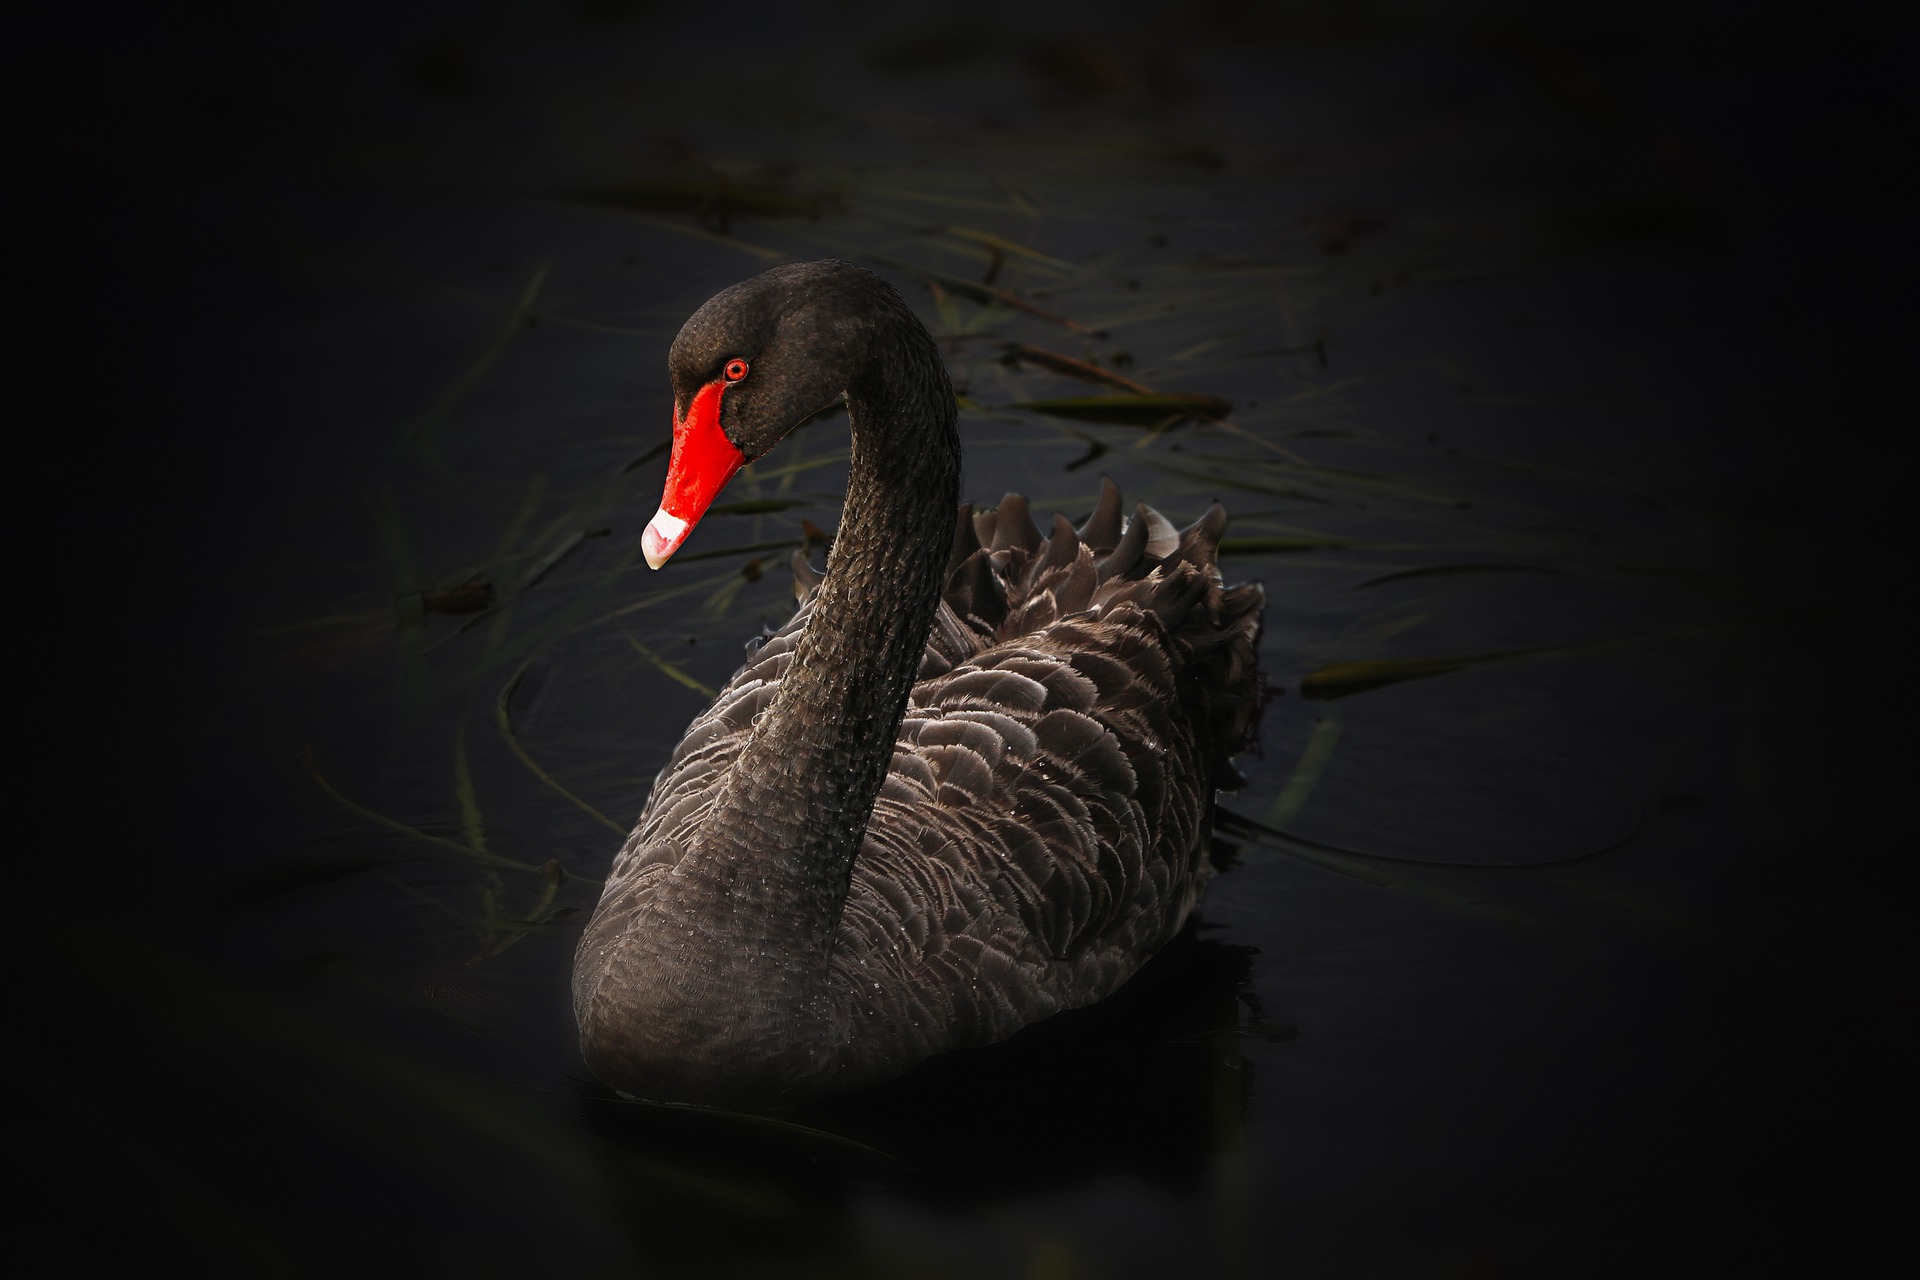 Black Swan: Spiritual Meaning, Dream Meaning, Symbolism & More -